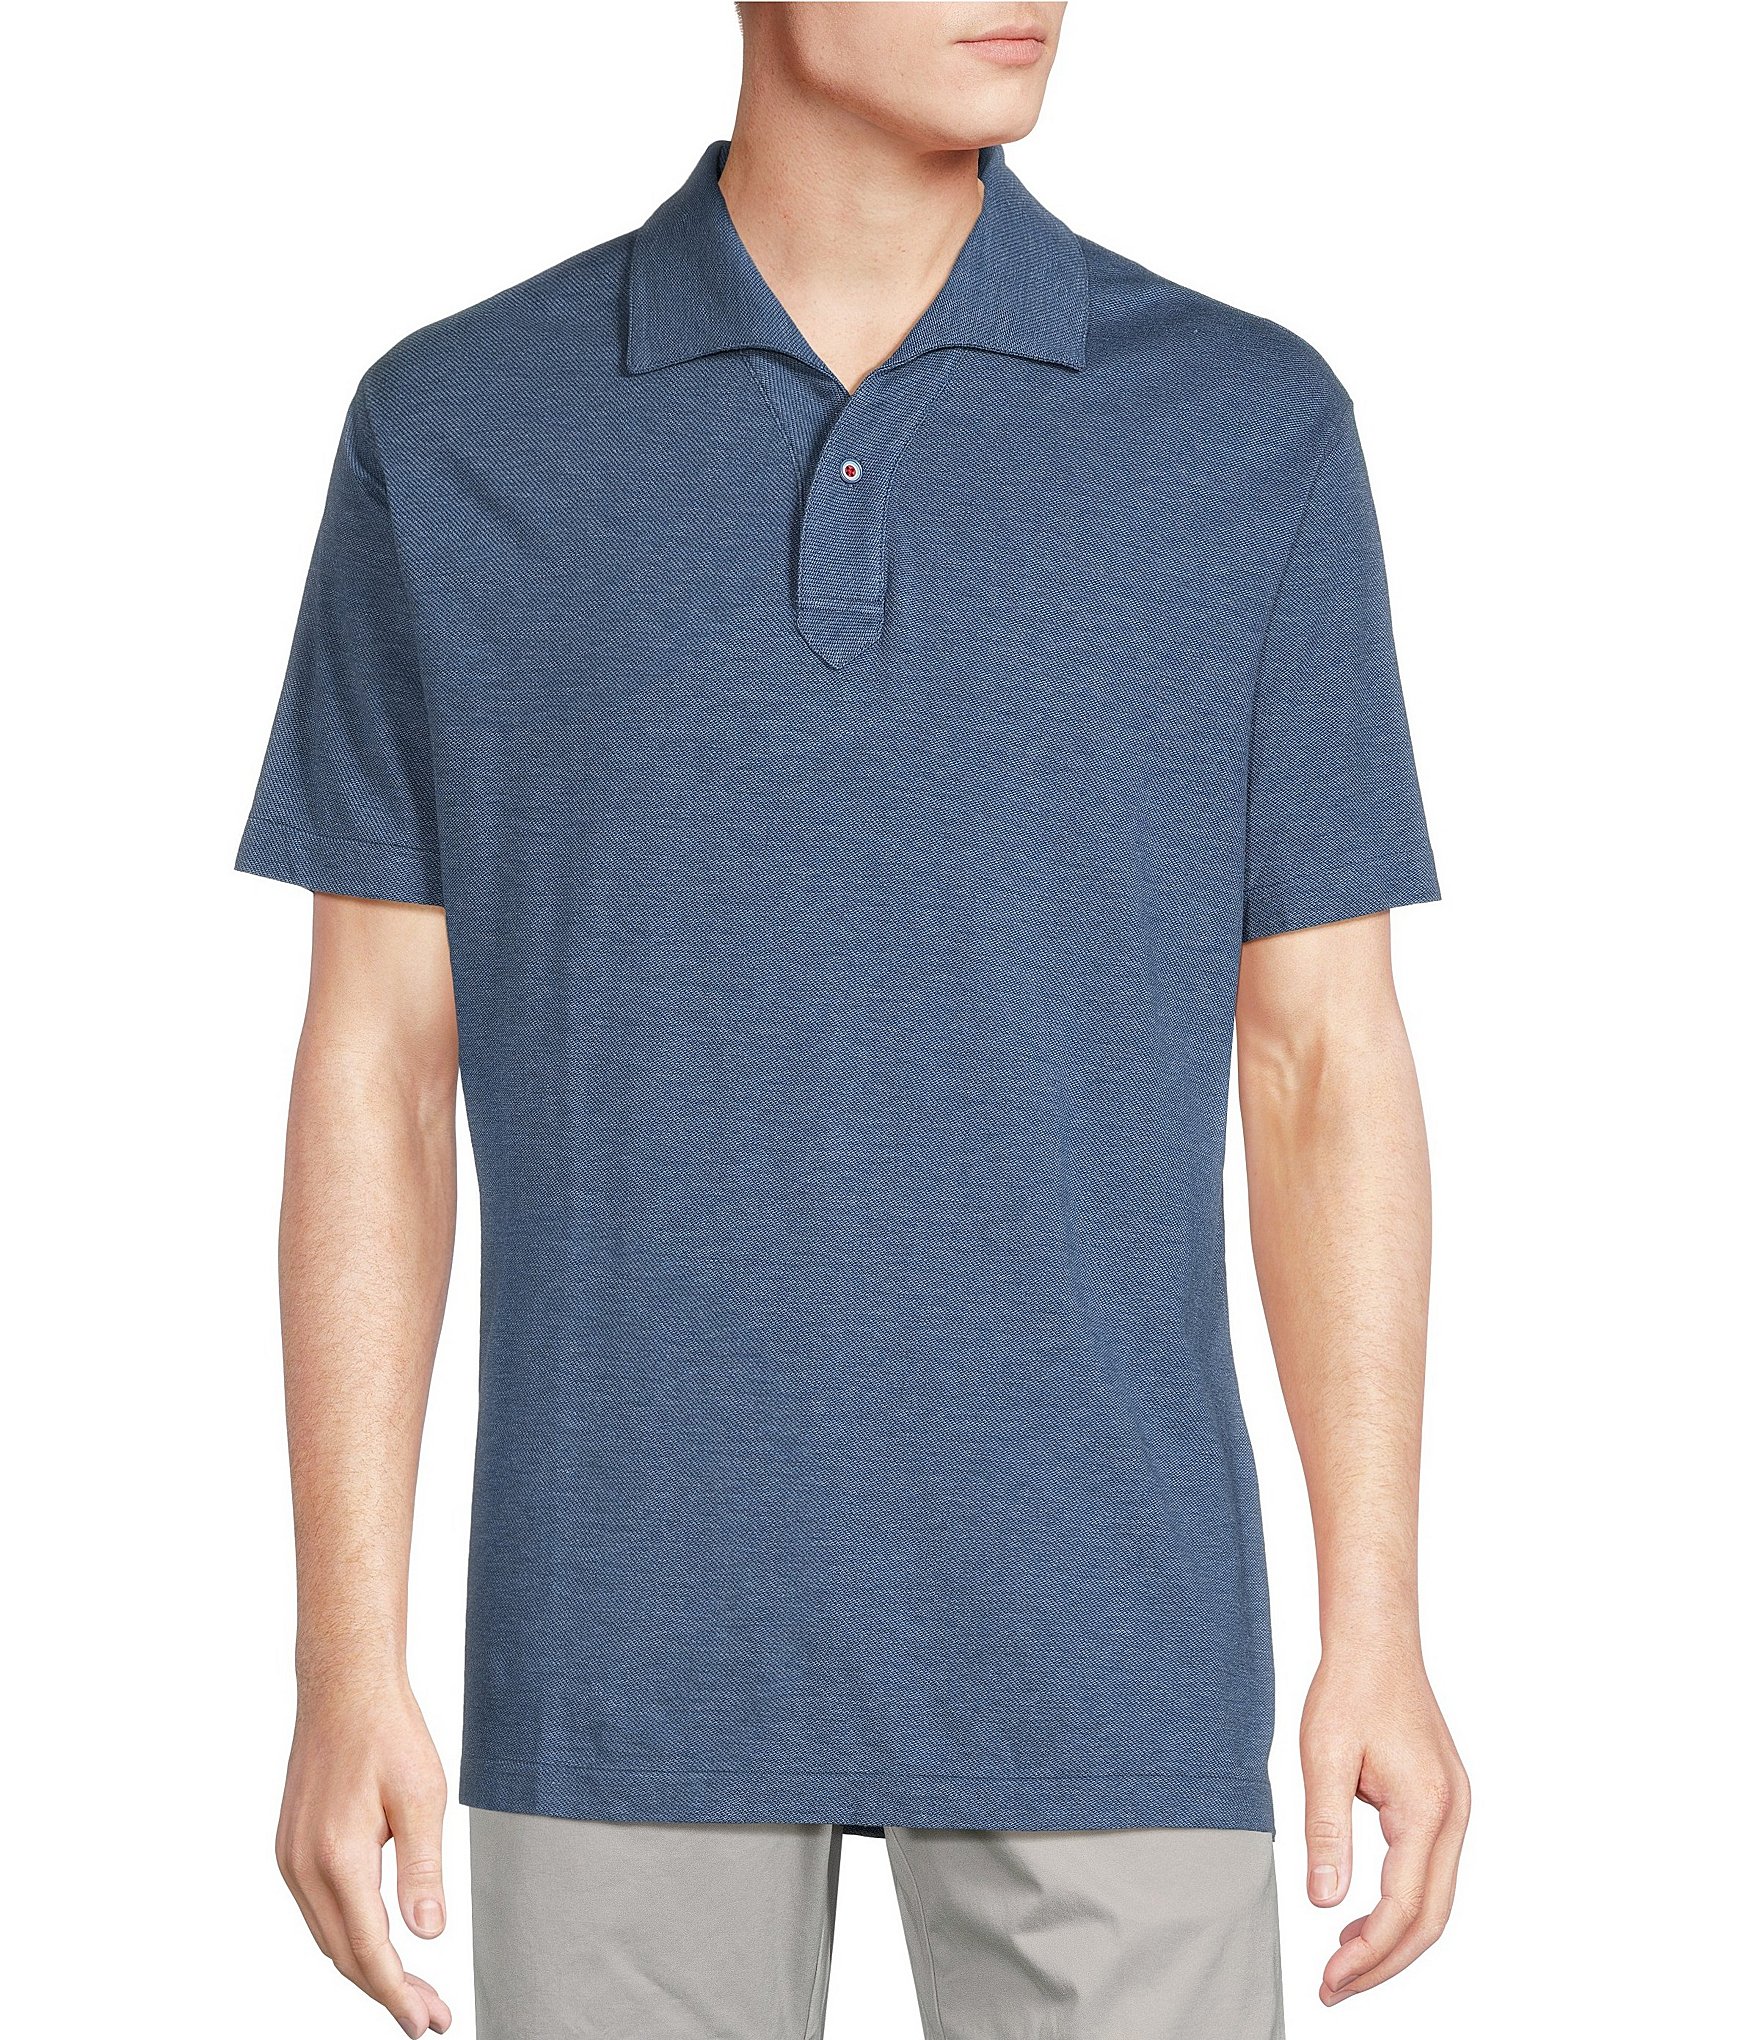 Cremieux Blue Label Martinque Collection Solid Short Sleeve Jacquard ...